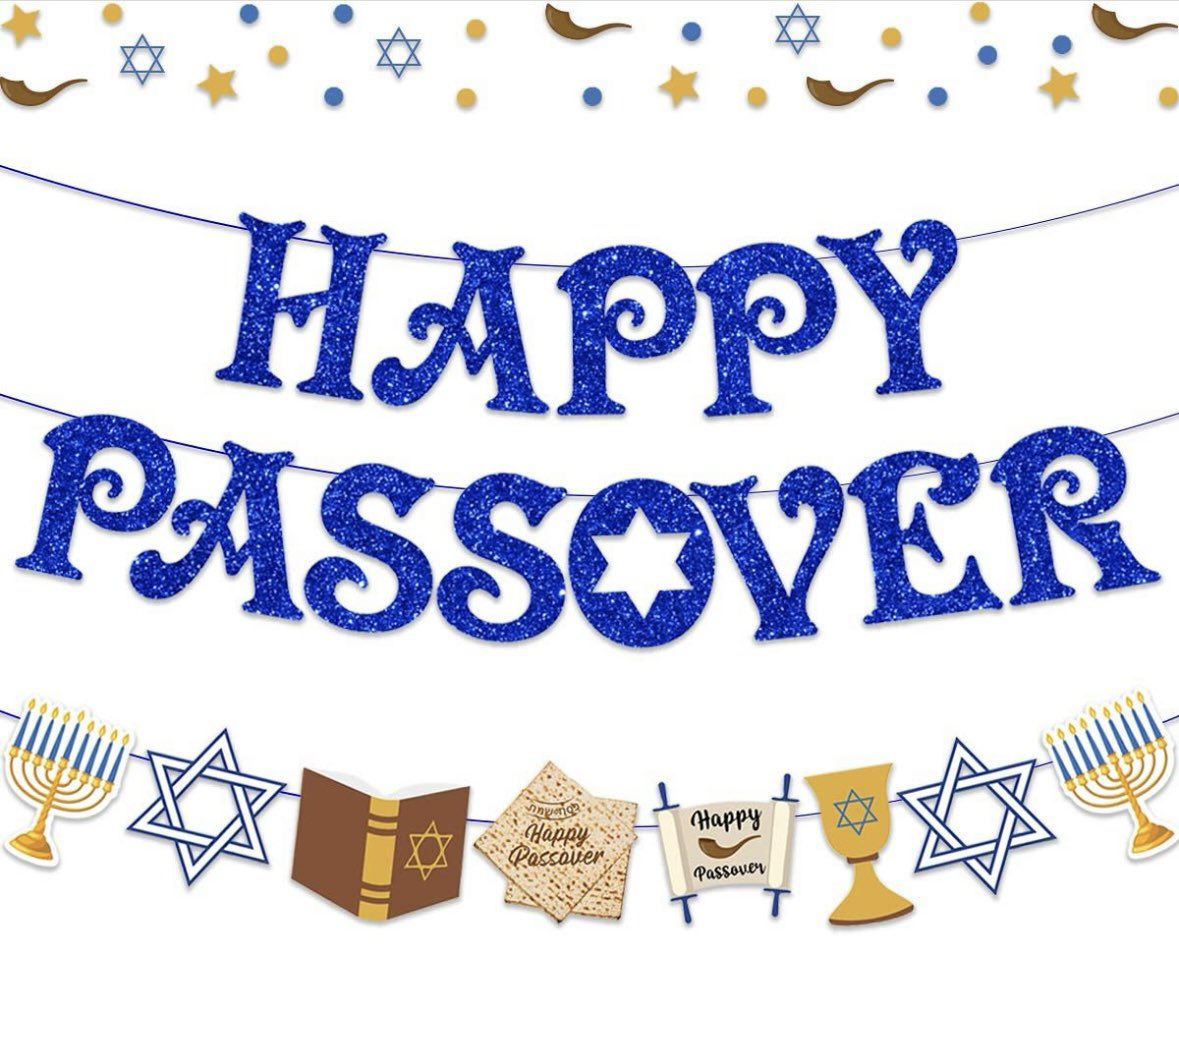 For those that celebrate: May you be Blessed with more smiles, more happiness and more success. Wishing you peace and blessings always. Happy Pesach 🩵 #Passover